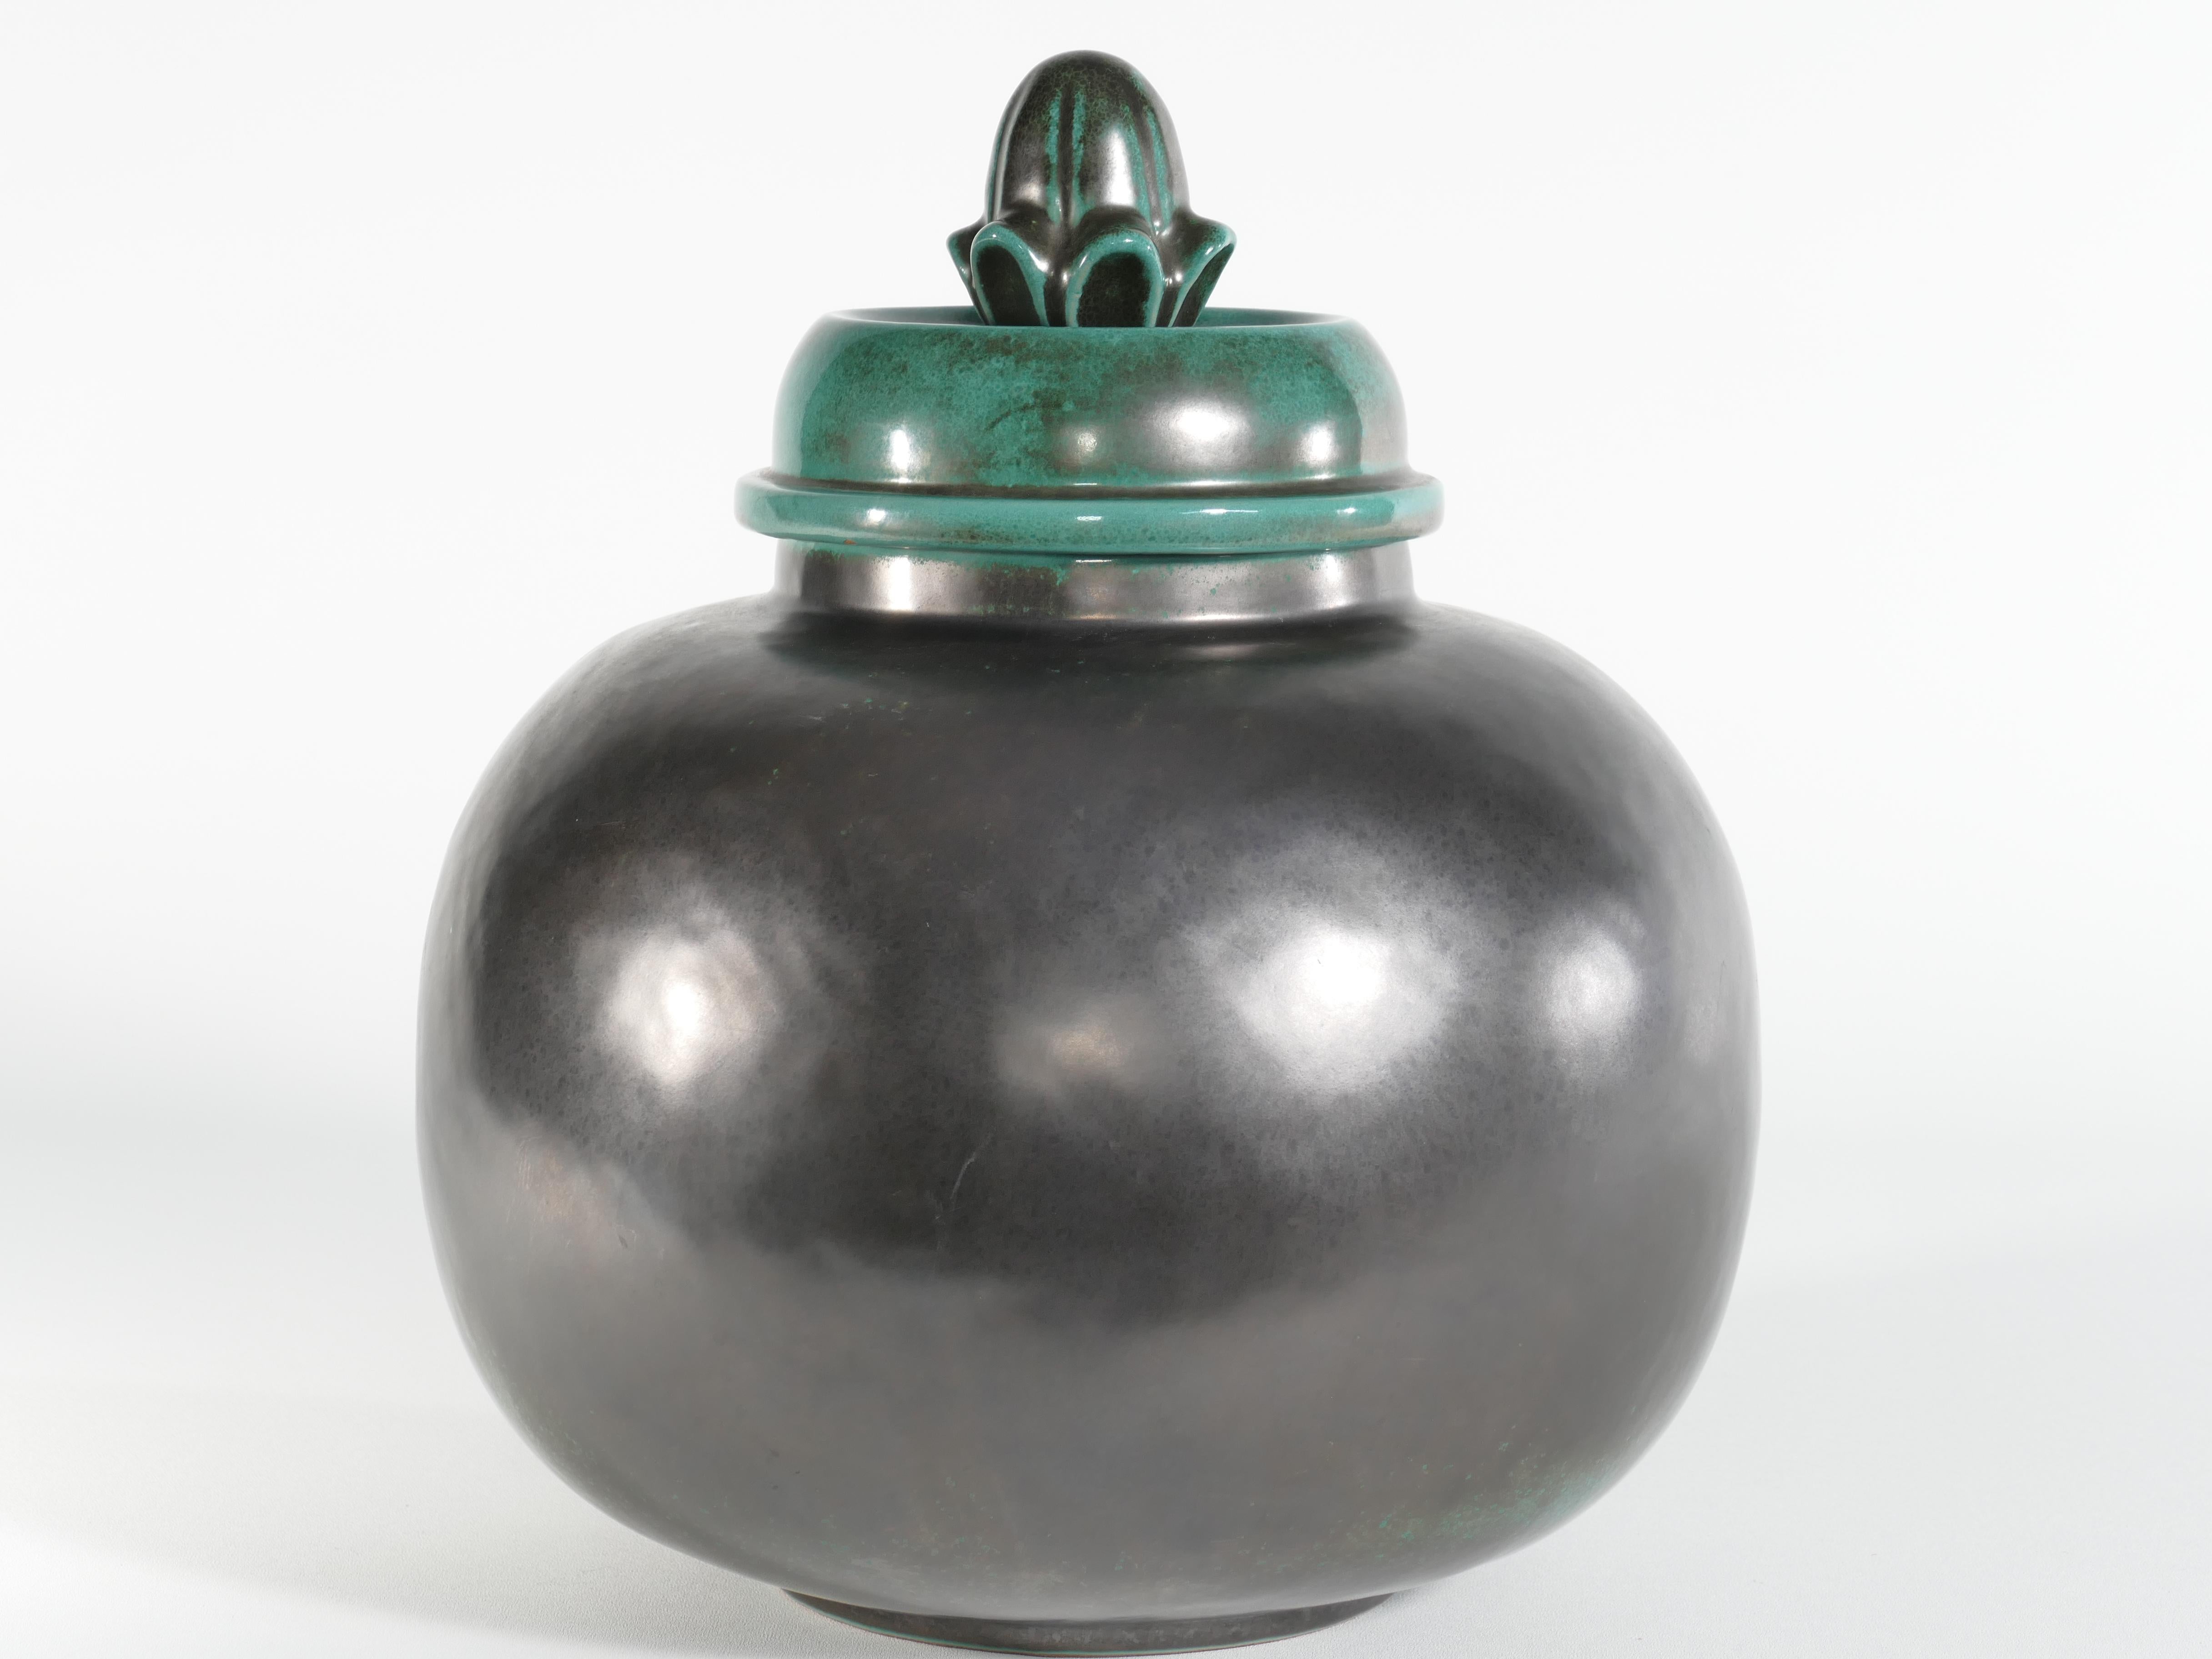 This art deco lidded jar by Anna-Lisa Thomson for Upsala-Ekeby is bathed in a mesmerizing deep green glaze and floral relief decor. This model  (number 2650) was only produced between 1932-1938. 